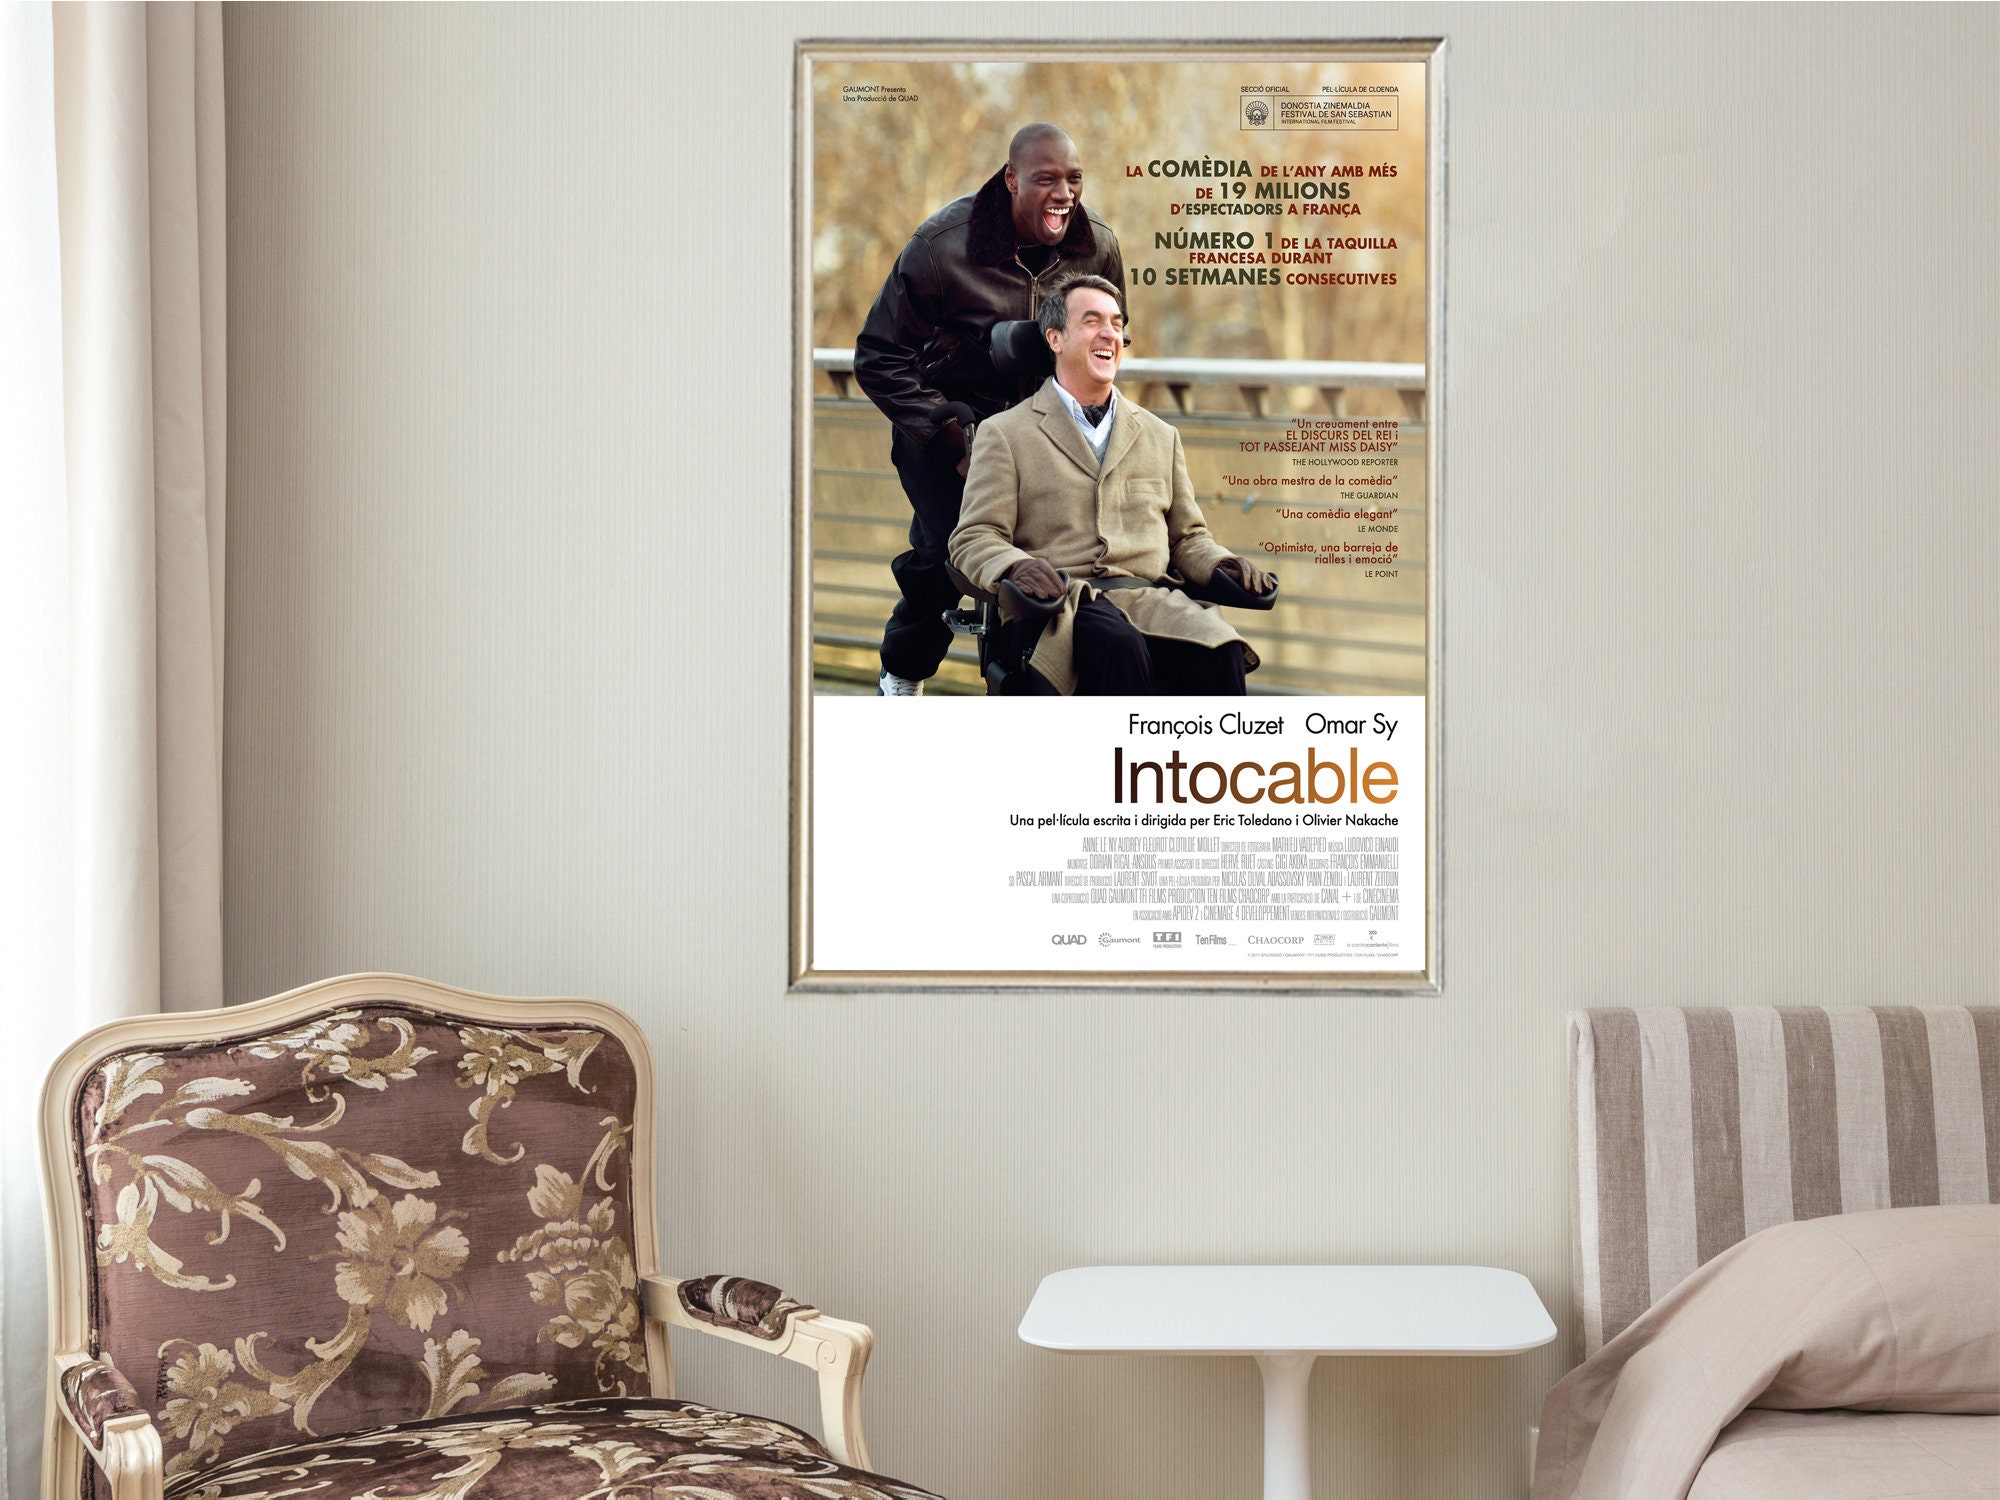 THE UNTOUCHABLES 2011 MOVIE POSTER A3 A4 * Classic Cult Film Poster Prints